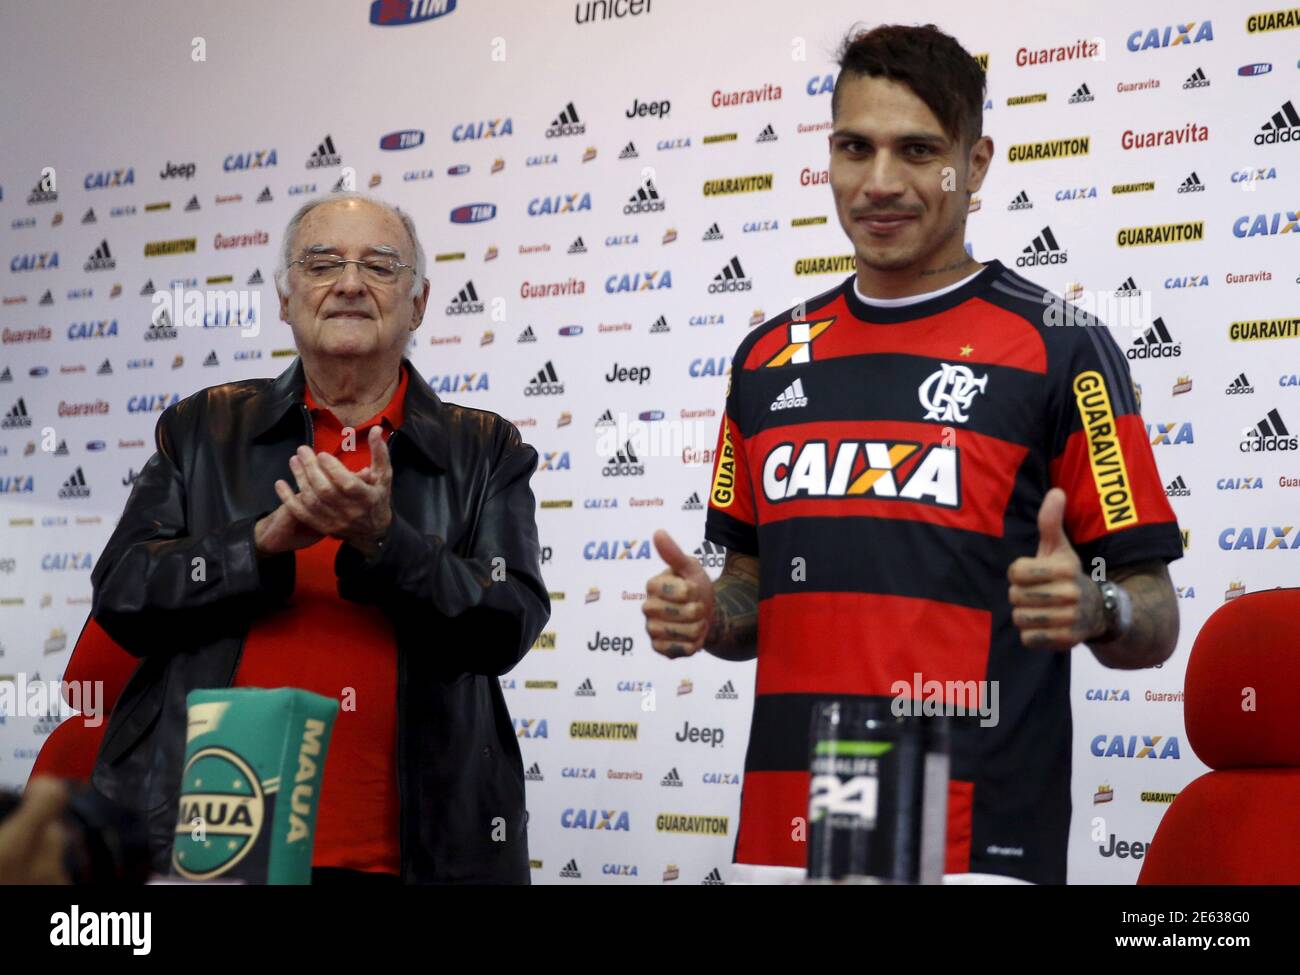 Flamengo's new soccer player Paolo Guerrero, accompanied by vice-president Walter D'Agostino, poses wearing the club jersey during his presentation in Rio de Janeiro, Brazil July 7, 2015. REUTERS/Pilar Olivares Stock Photo